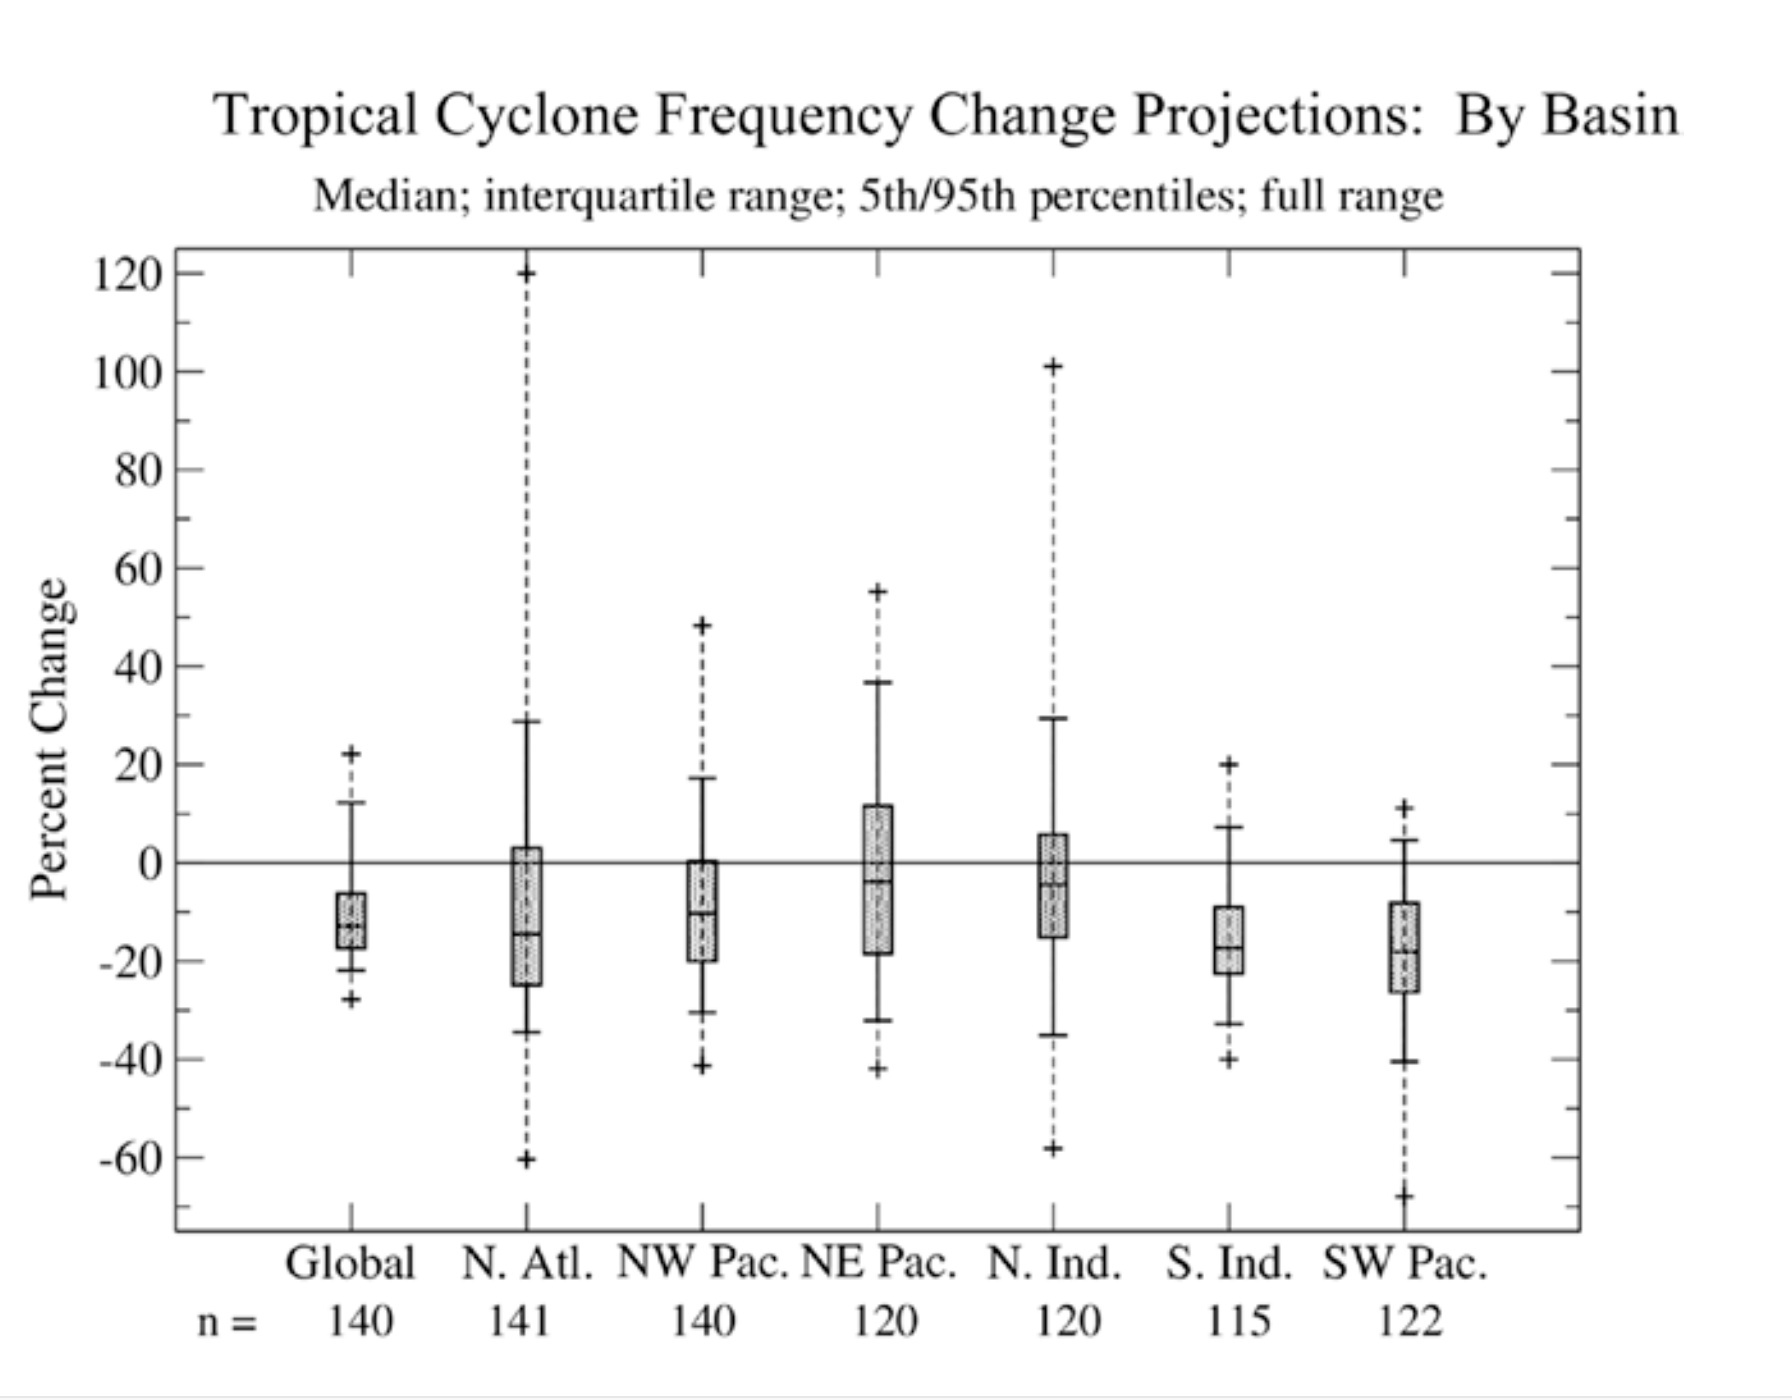 Tropical cyclone frequency change projections